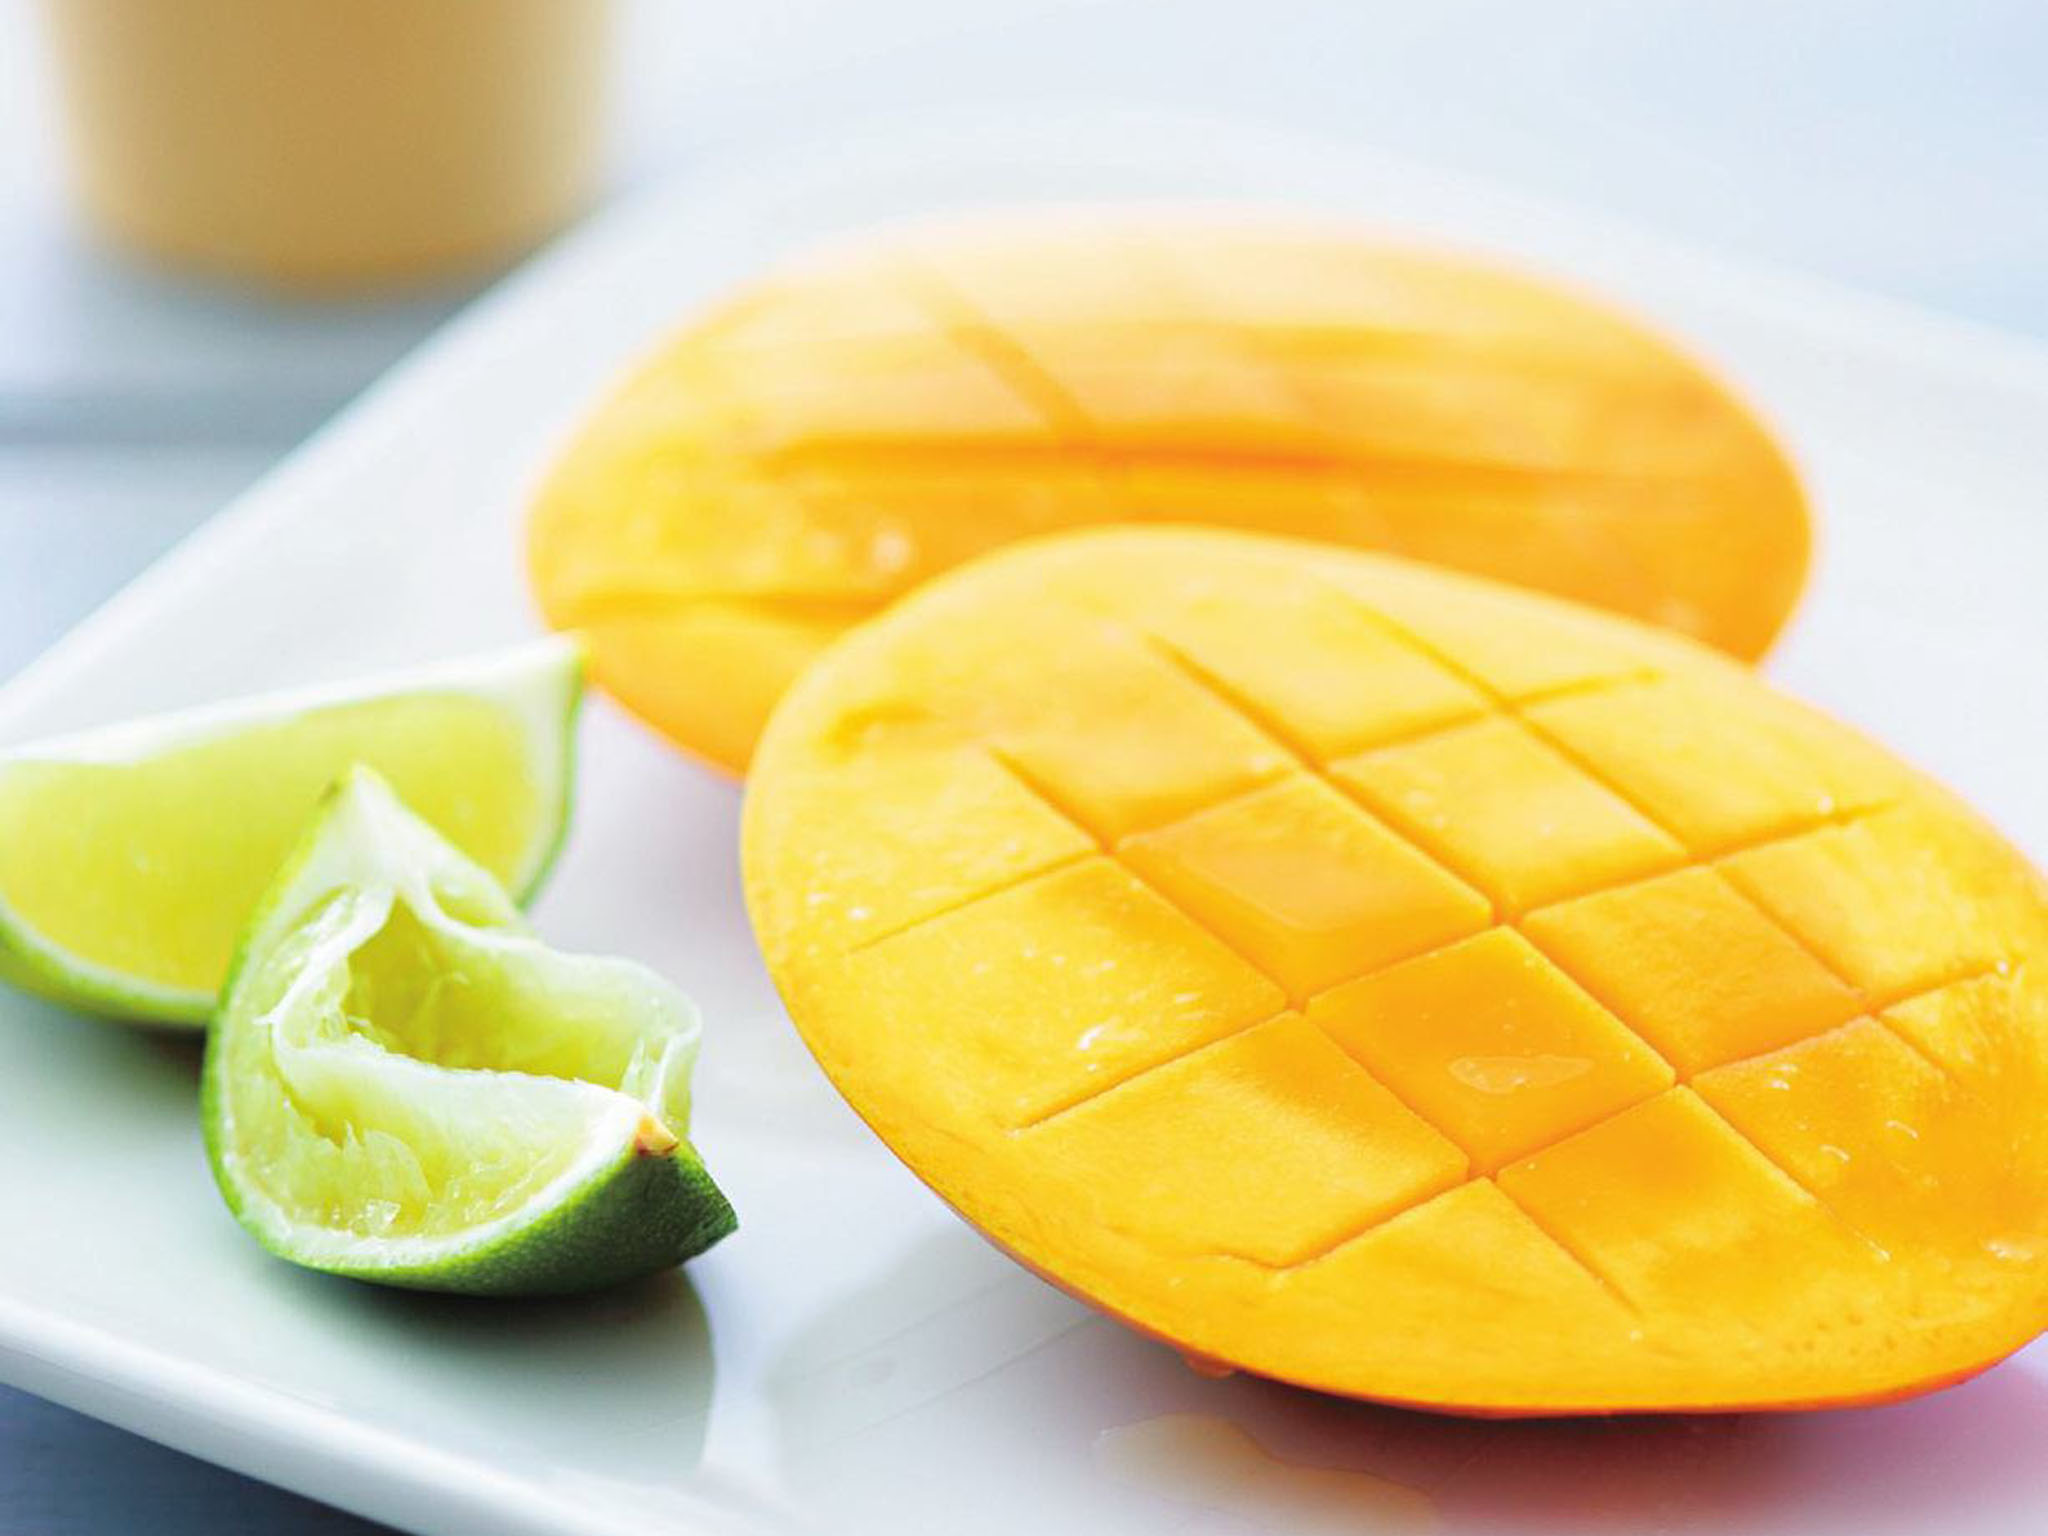 MANGO CHEEKS WITH LIME WEDGES